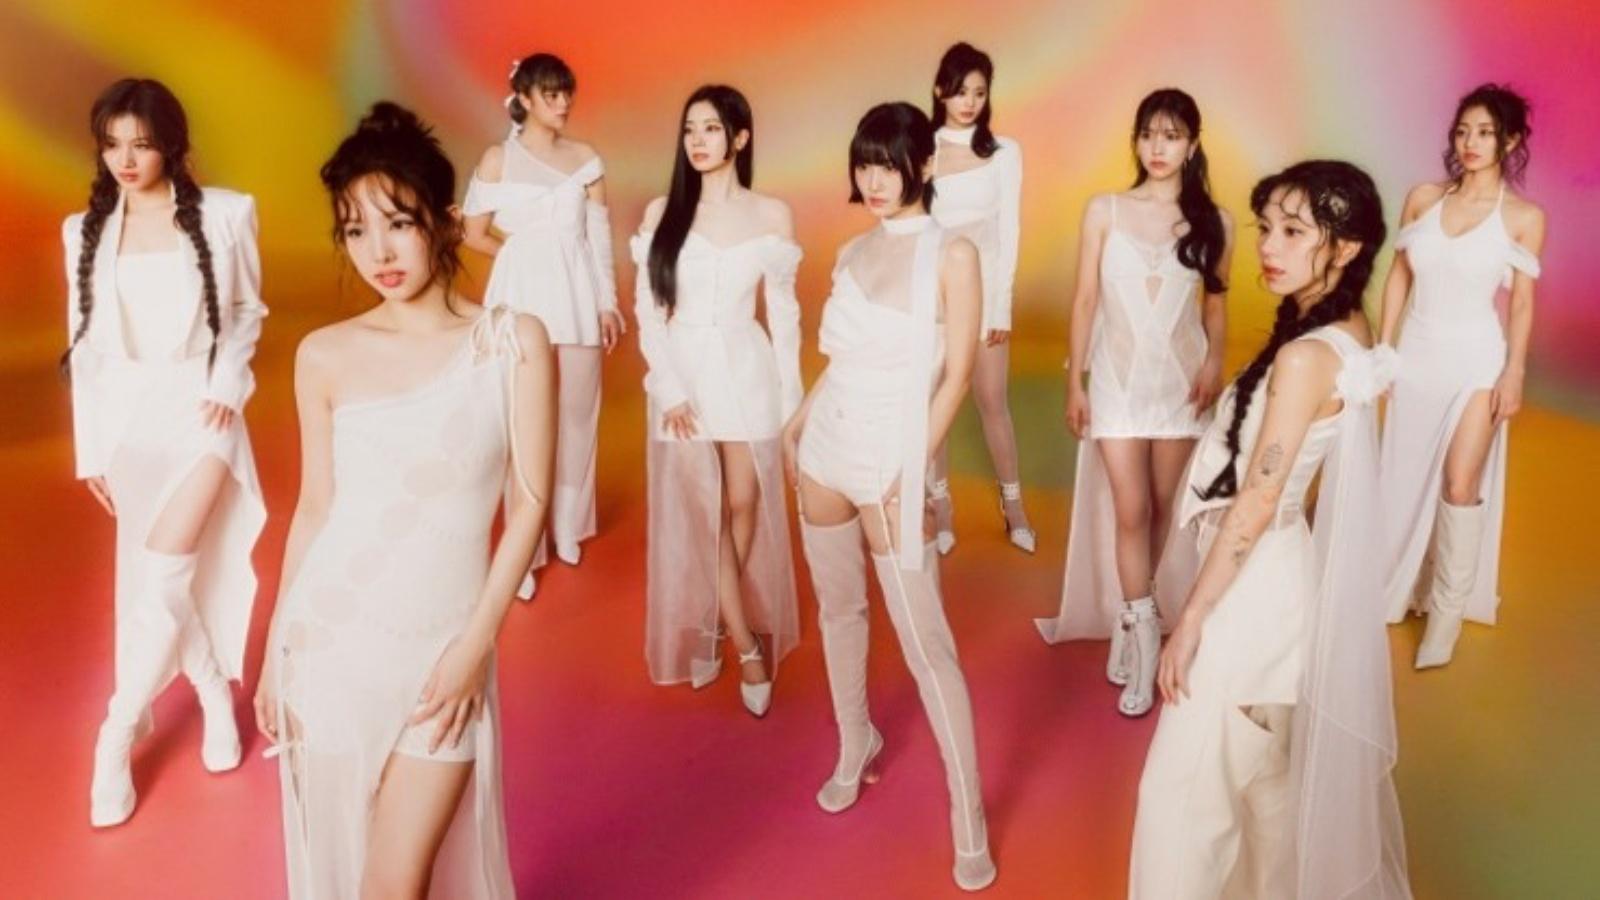 K-pop group Twice against a colorful background